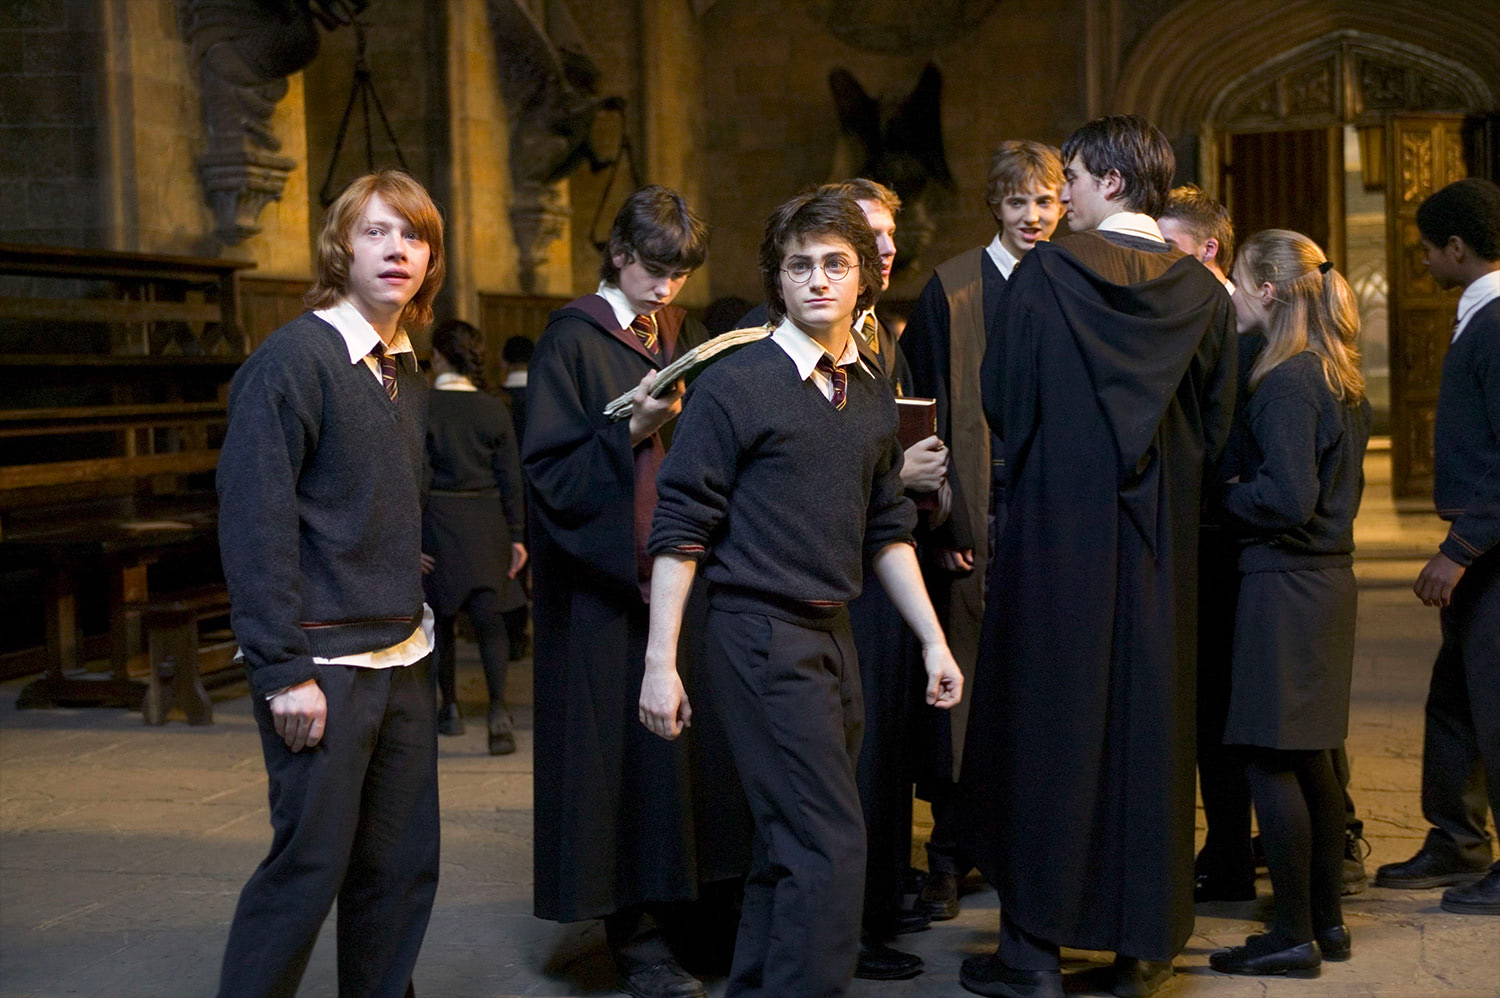 Harry, Ron, Neville and Cedric in the Great Hall